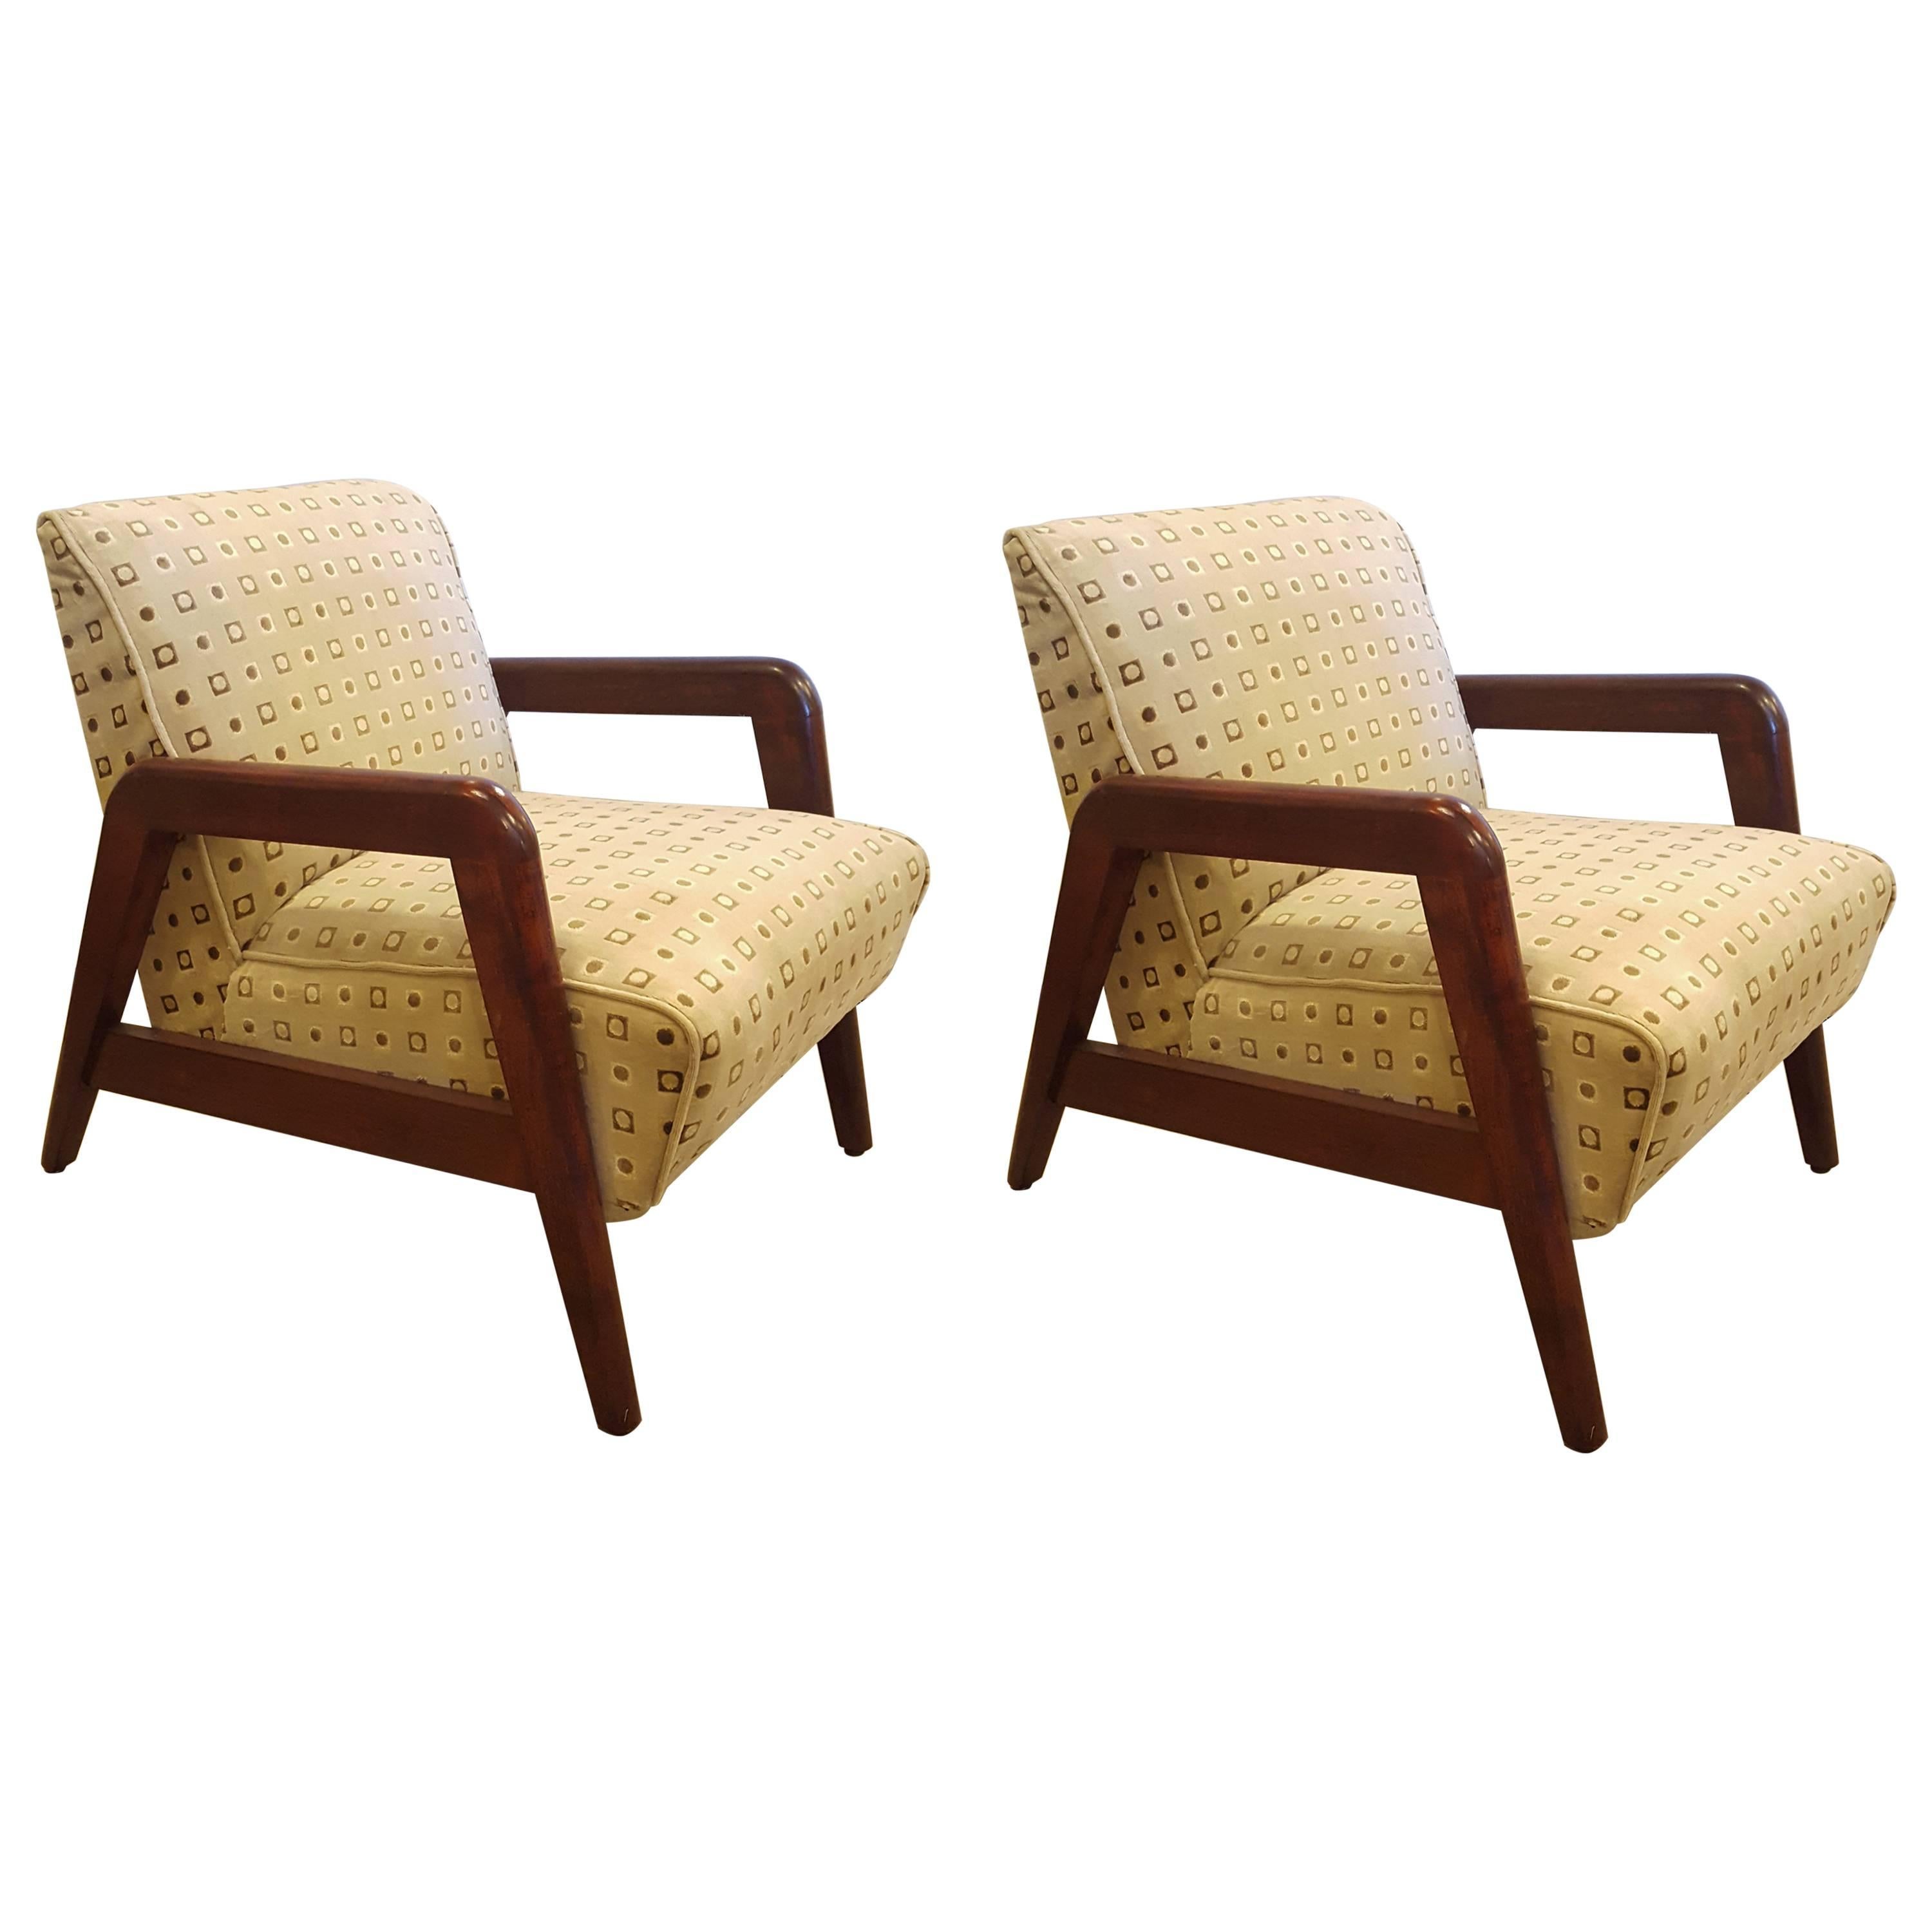 Pair of Mid-Century Modern Armchairs, One Rocker & One Lounge Chair 